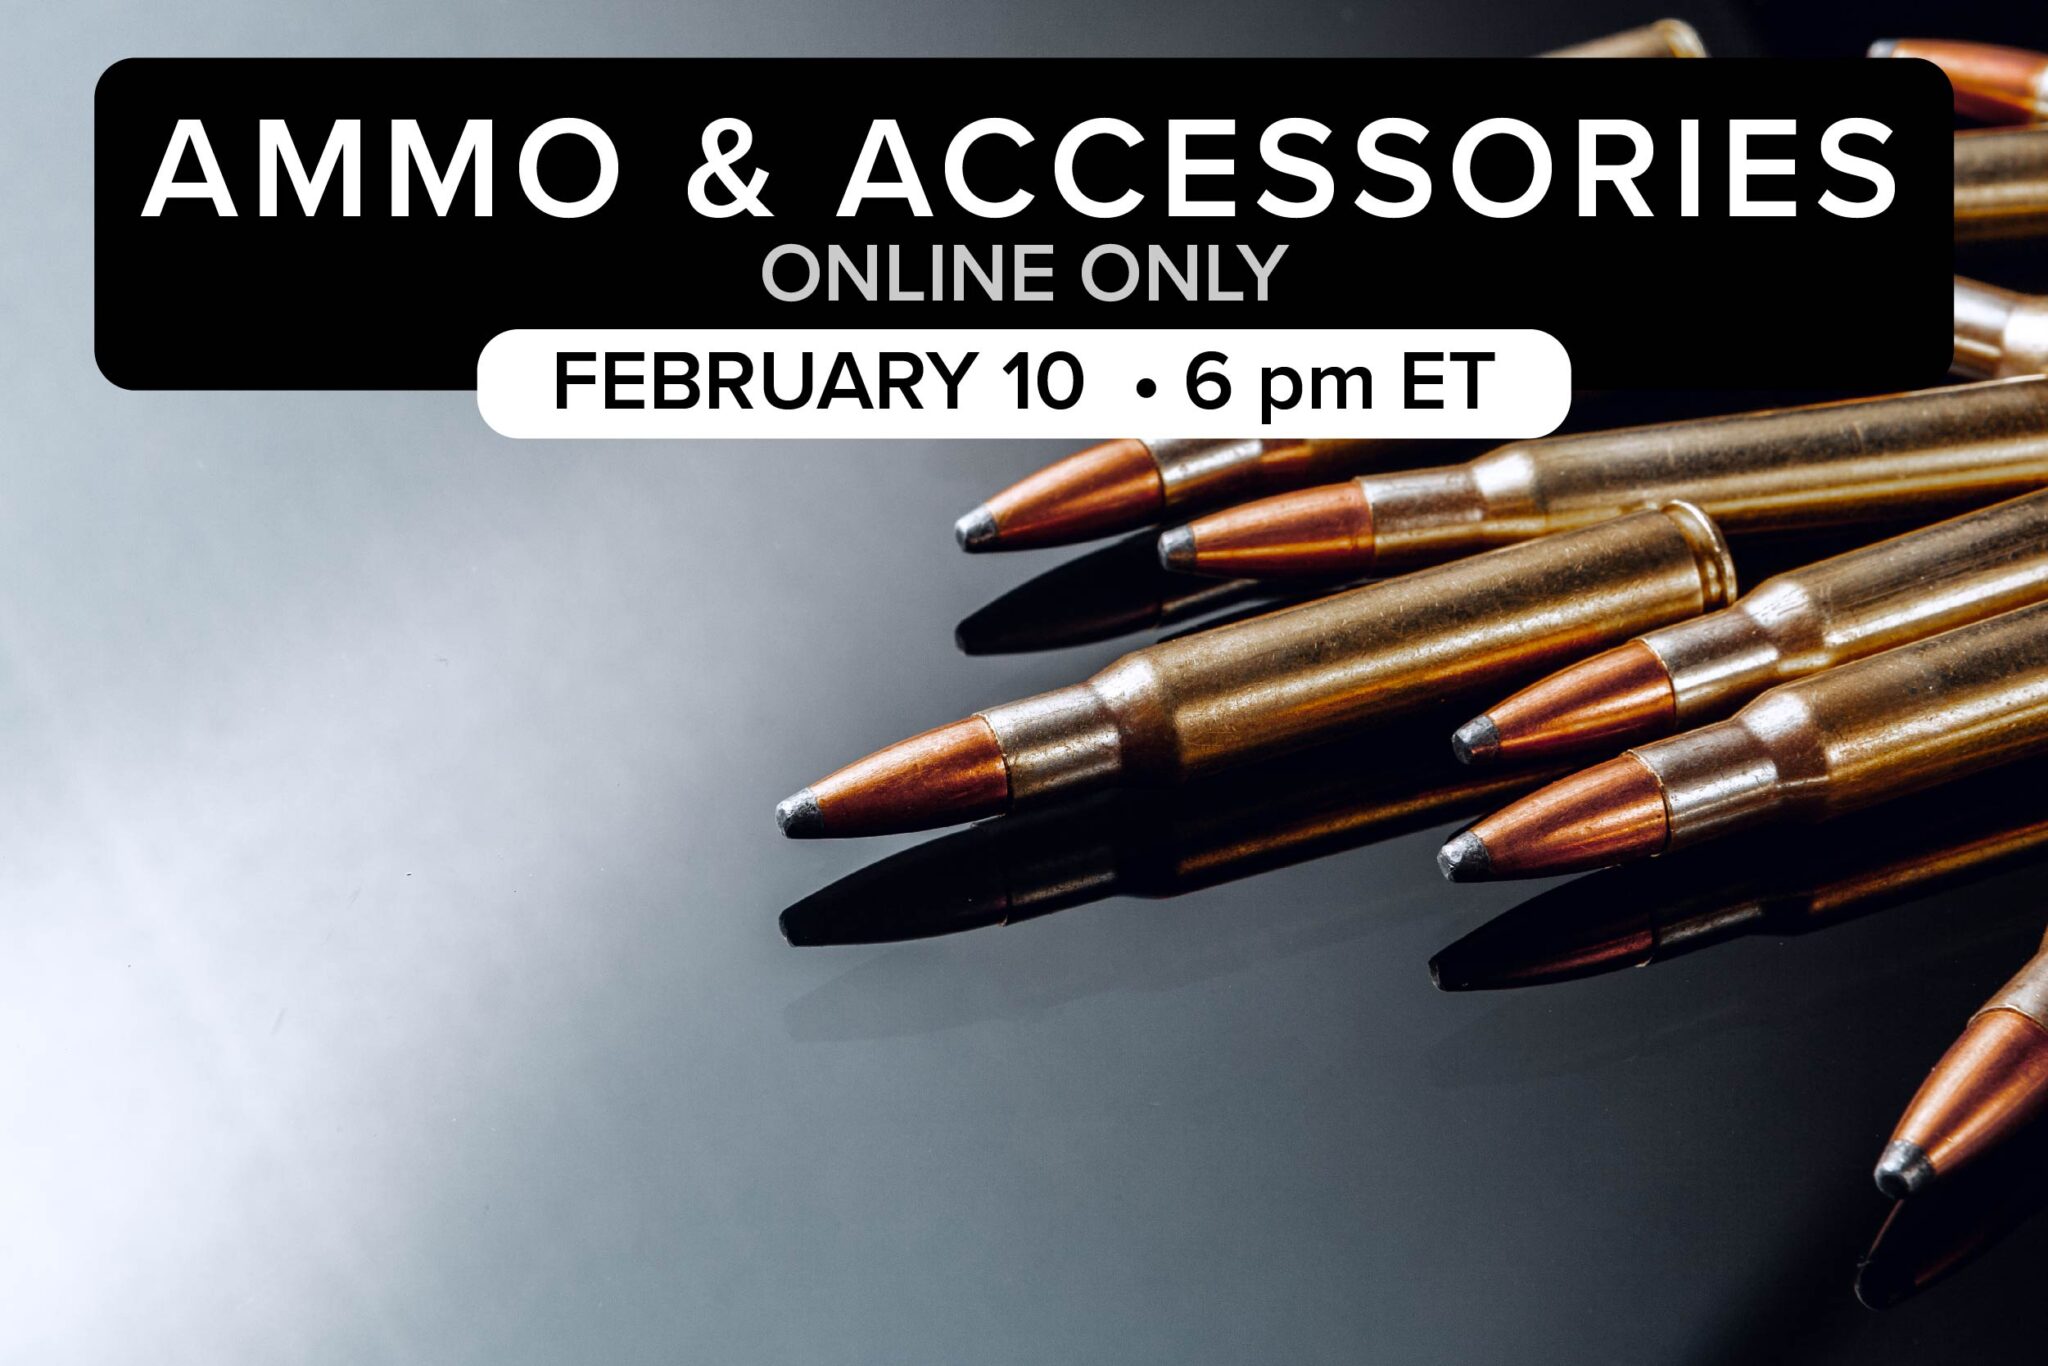 ammo & accessories banner with rifle ammo pictured